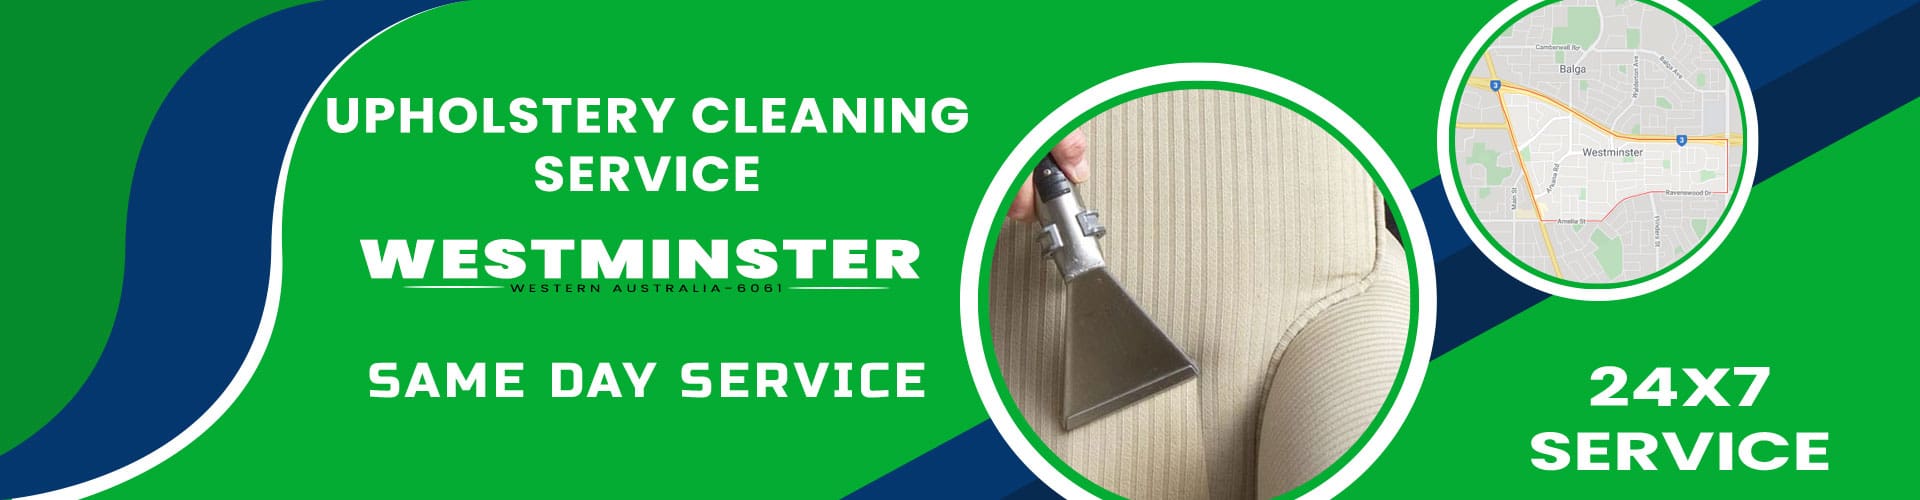 Upholstery Cleaning Westminster